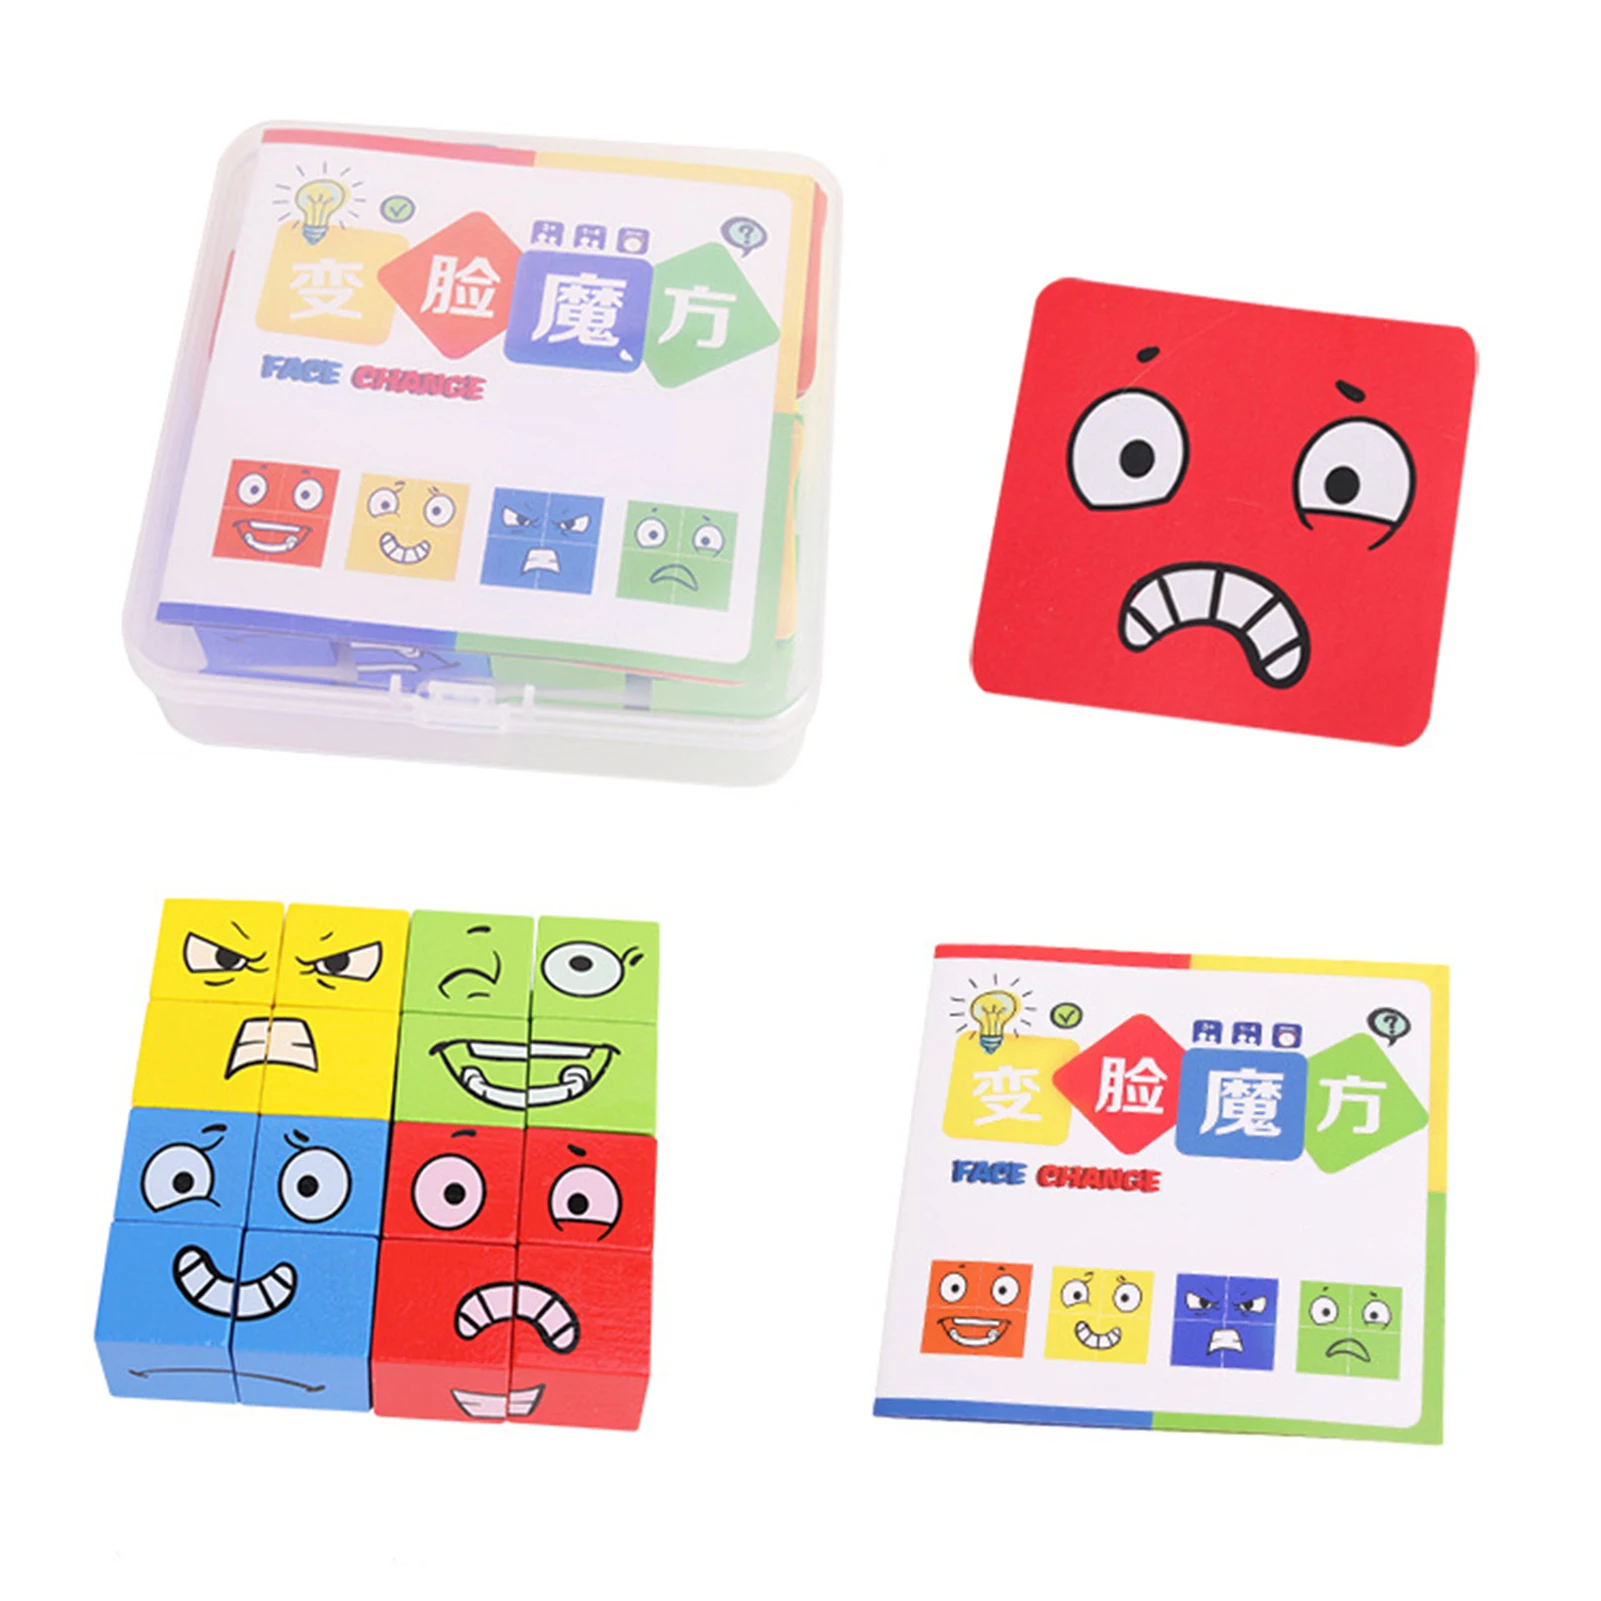 

Montessori Wooden Cube Table Games Expression Face Changing Building Blocks Toy Preschool Teaching Puzzle Interactive Board Game